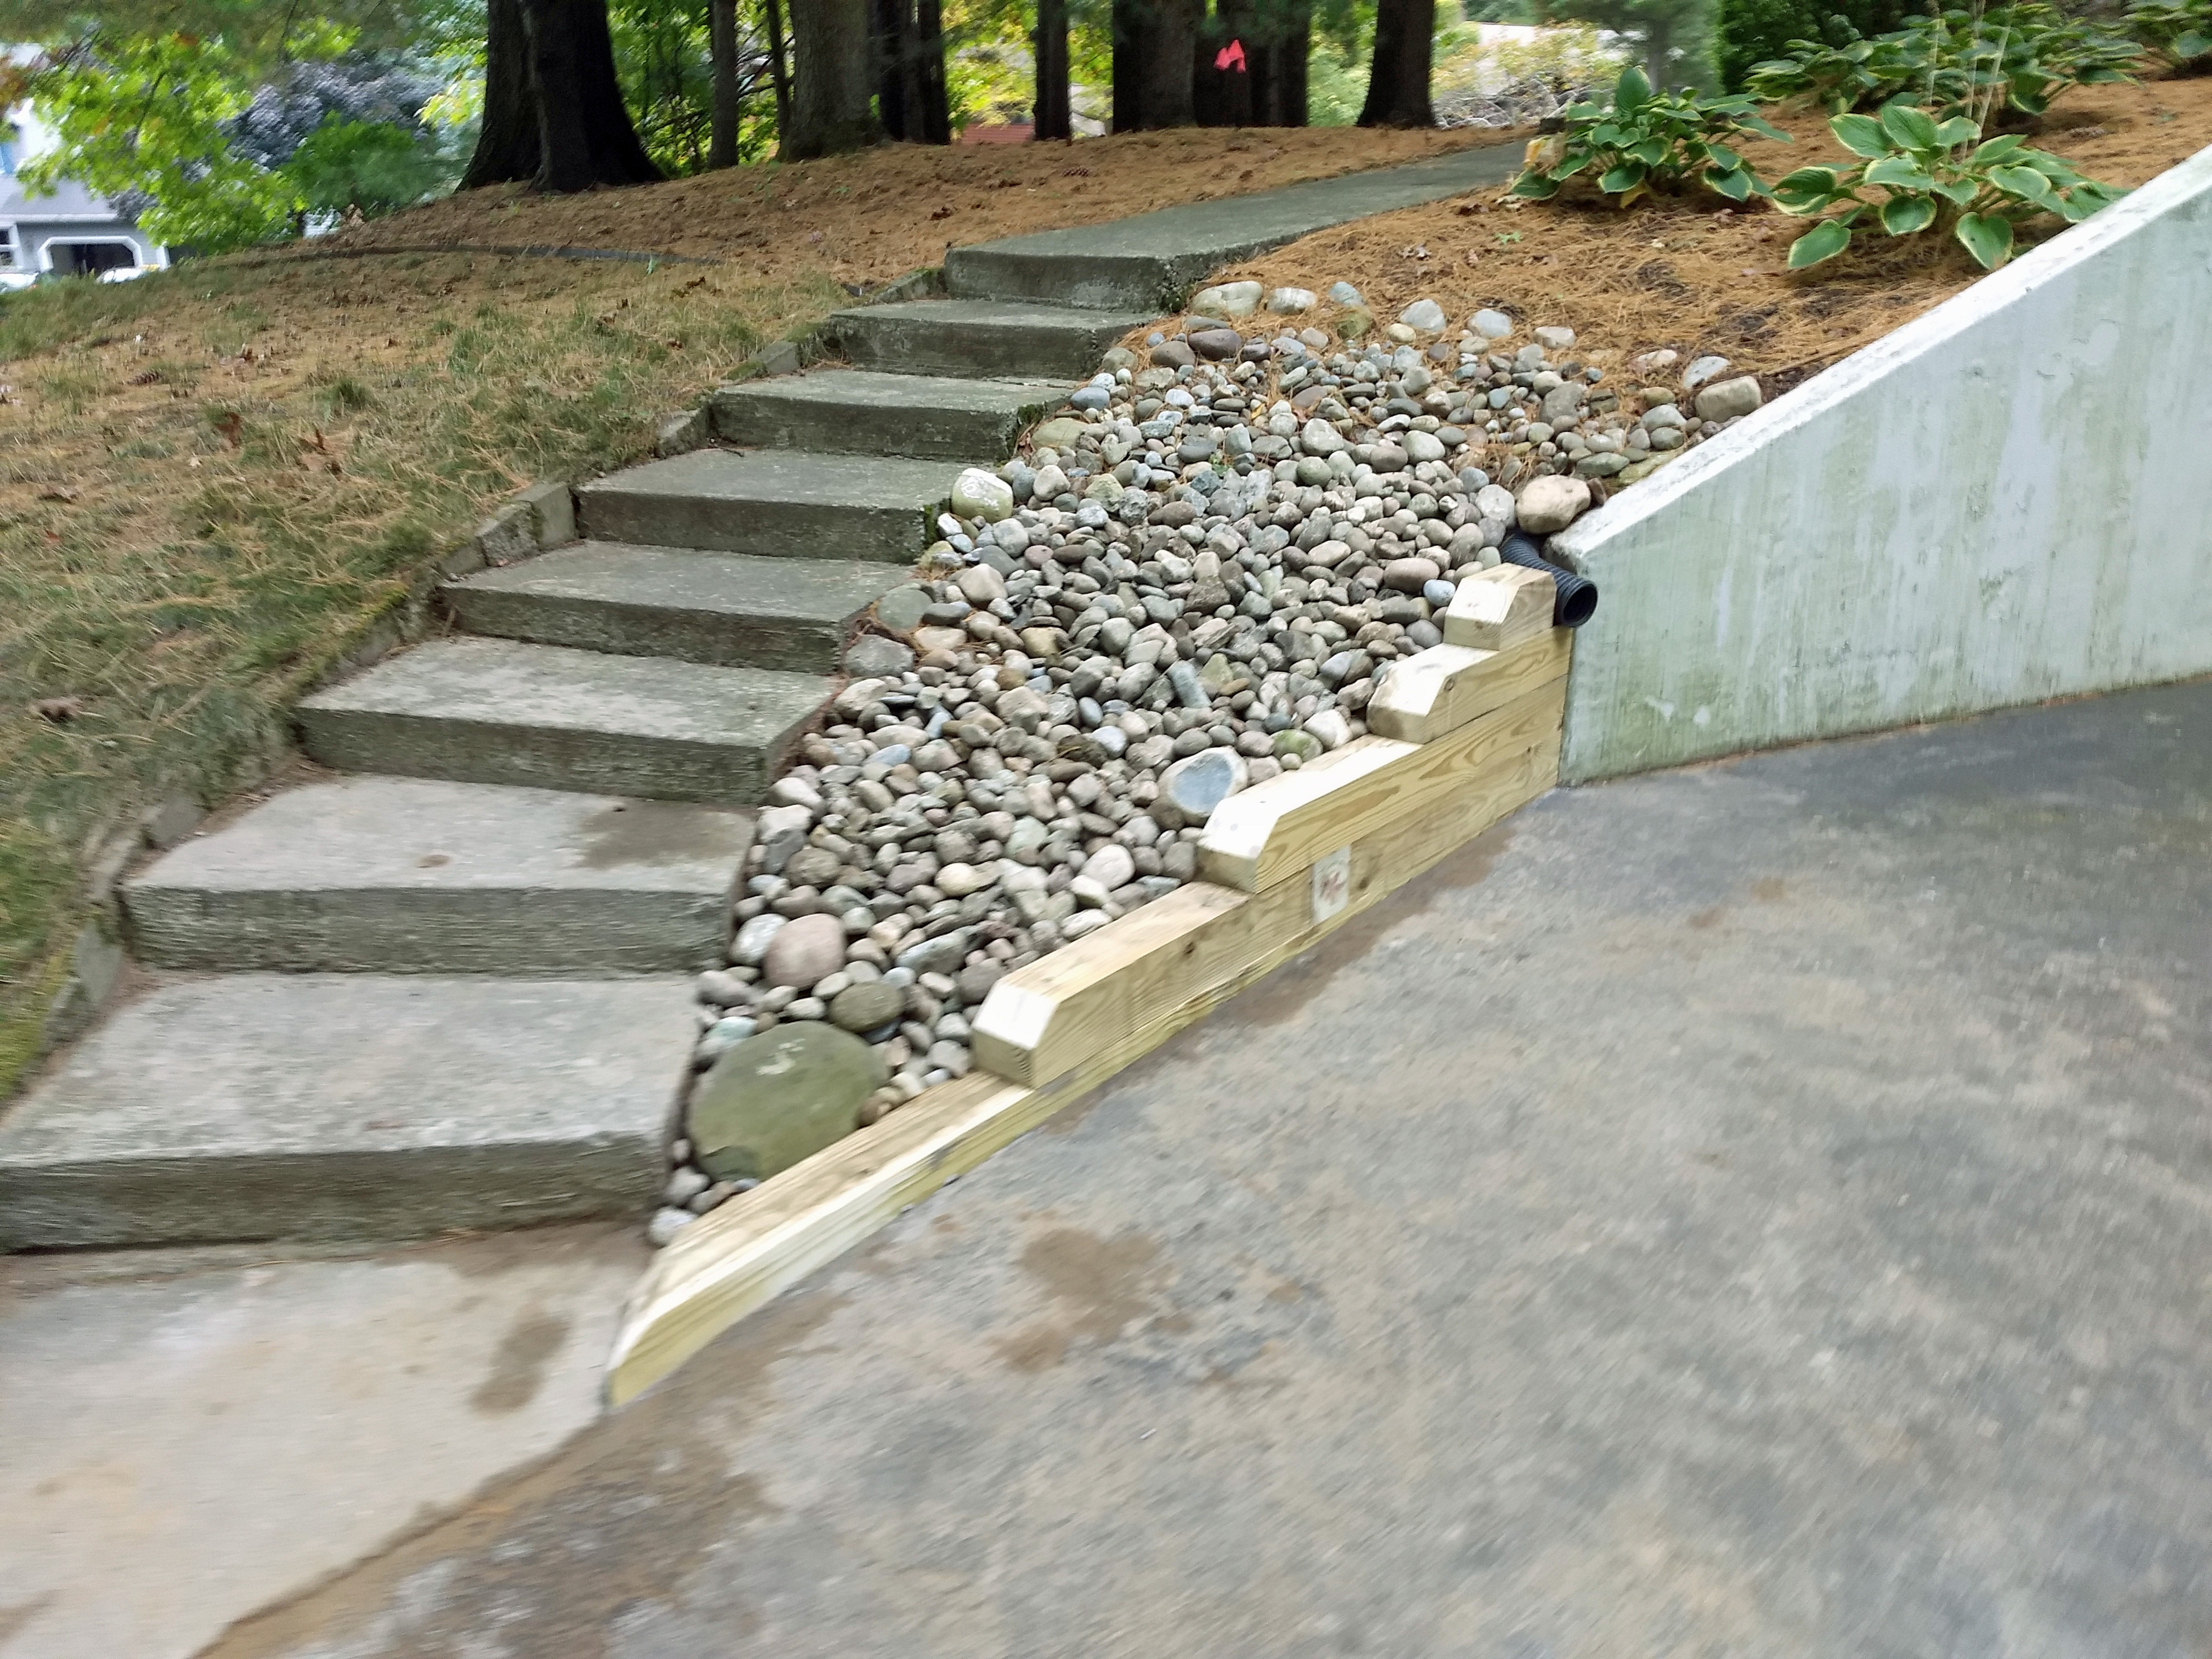 Thumbnail of the newly completed wooden retaining wall and stone bed